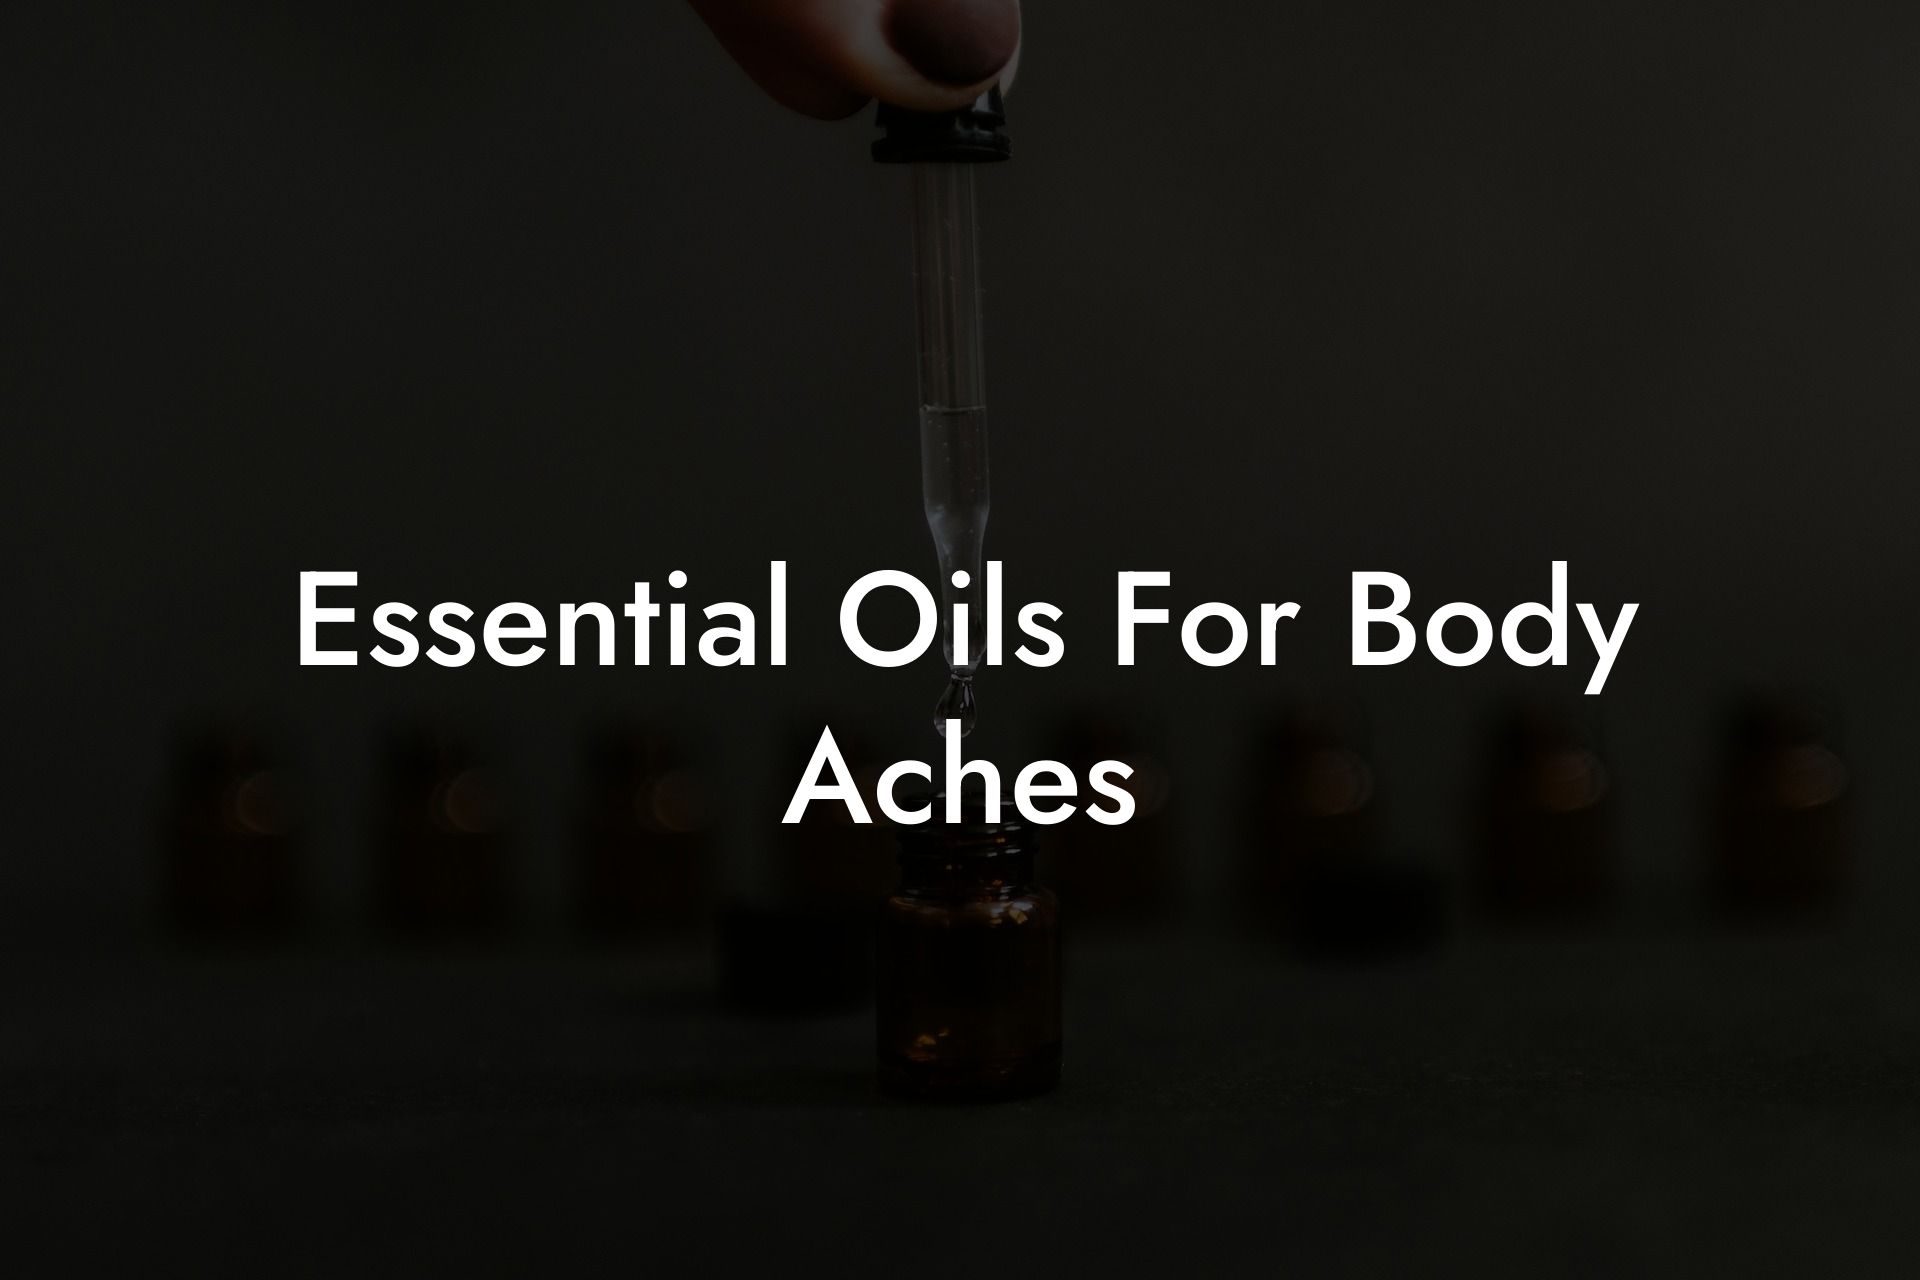 Essential Oils For Body Aches